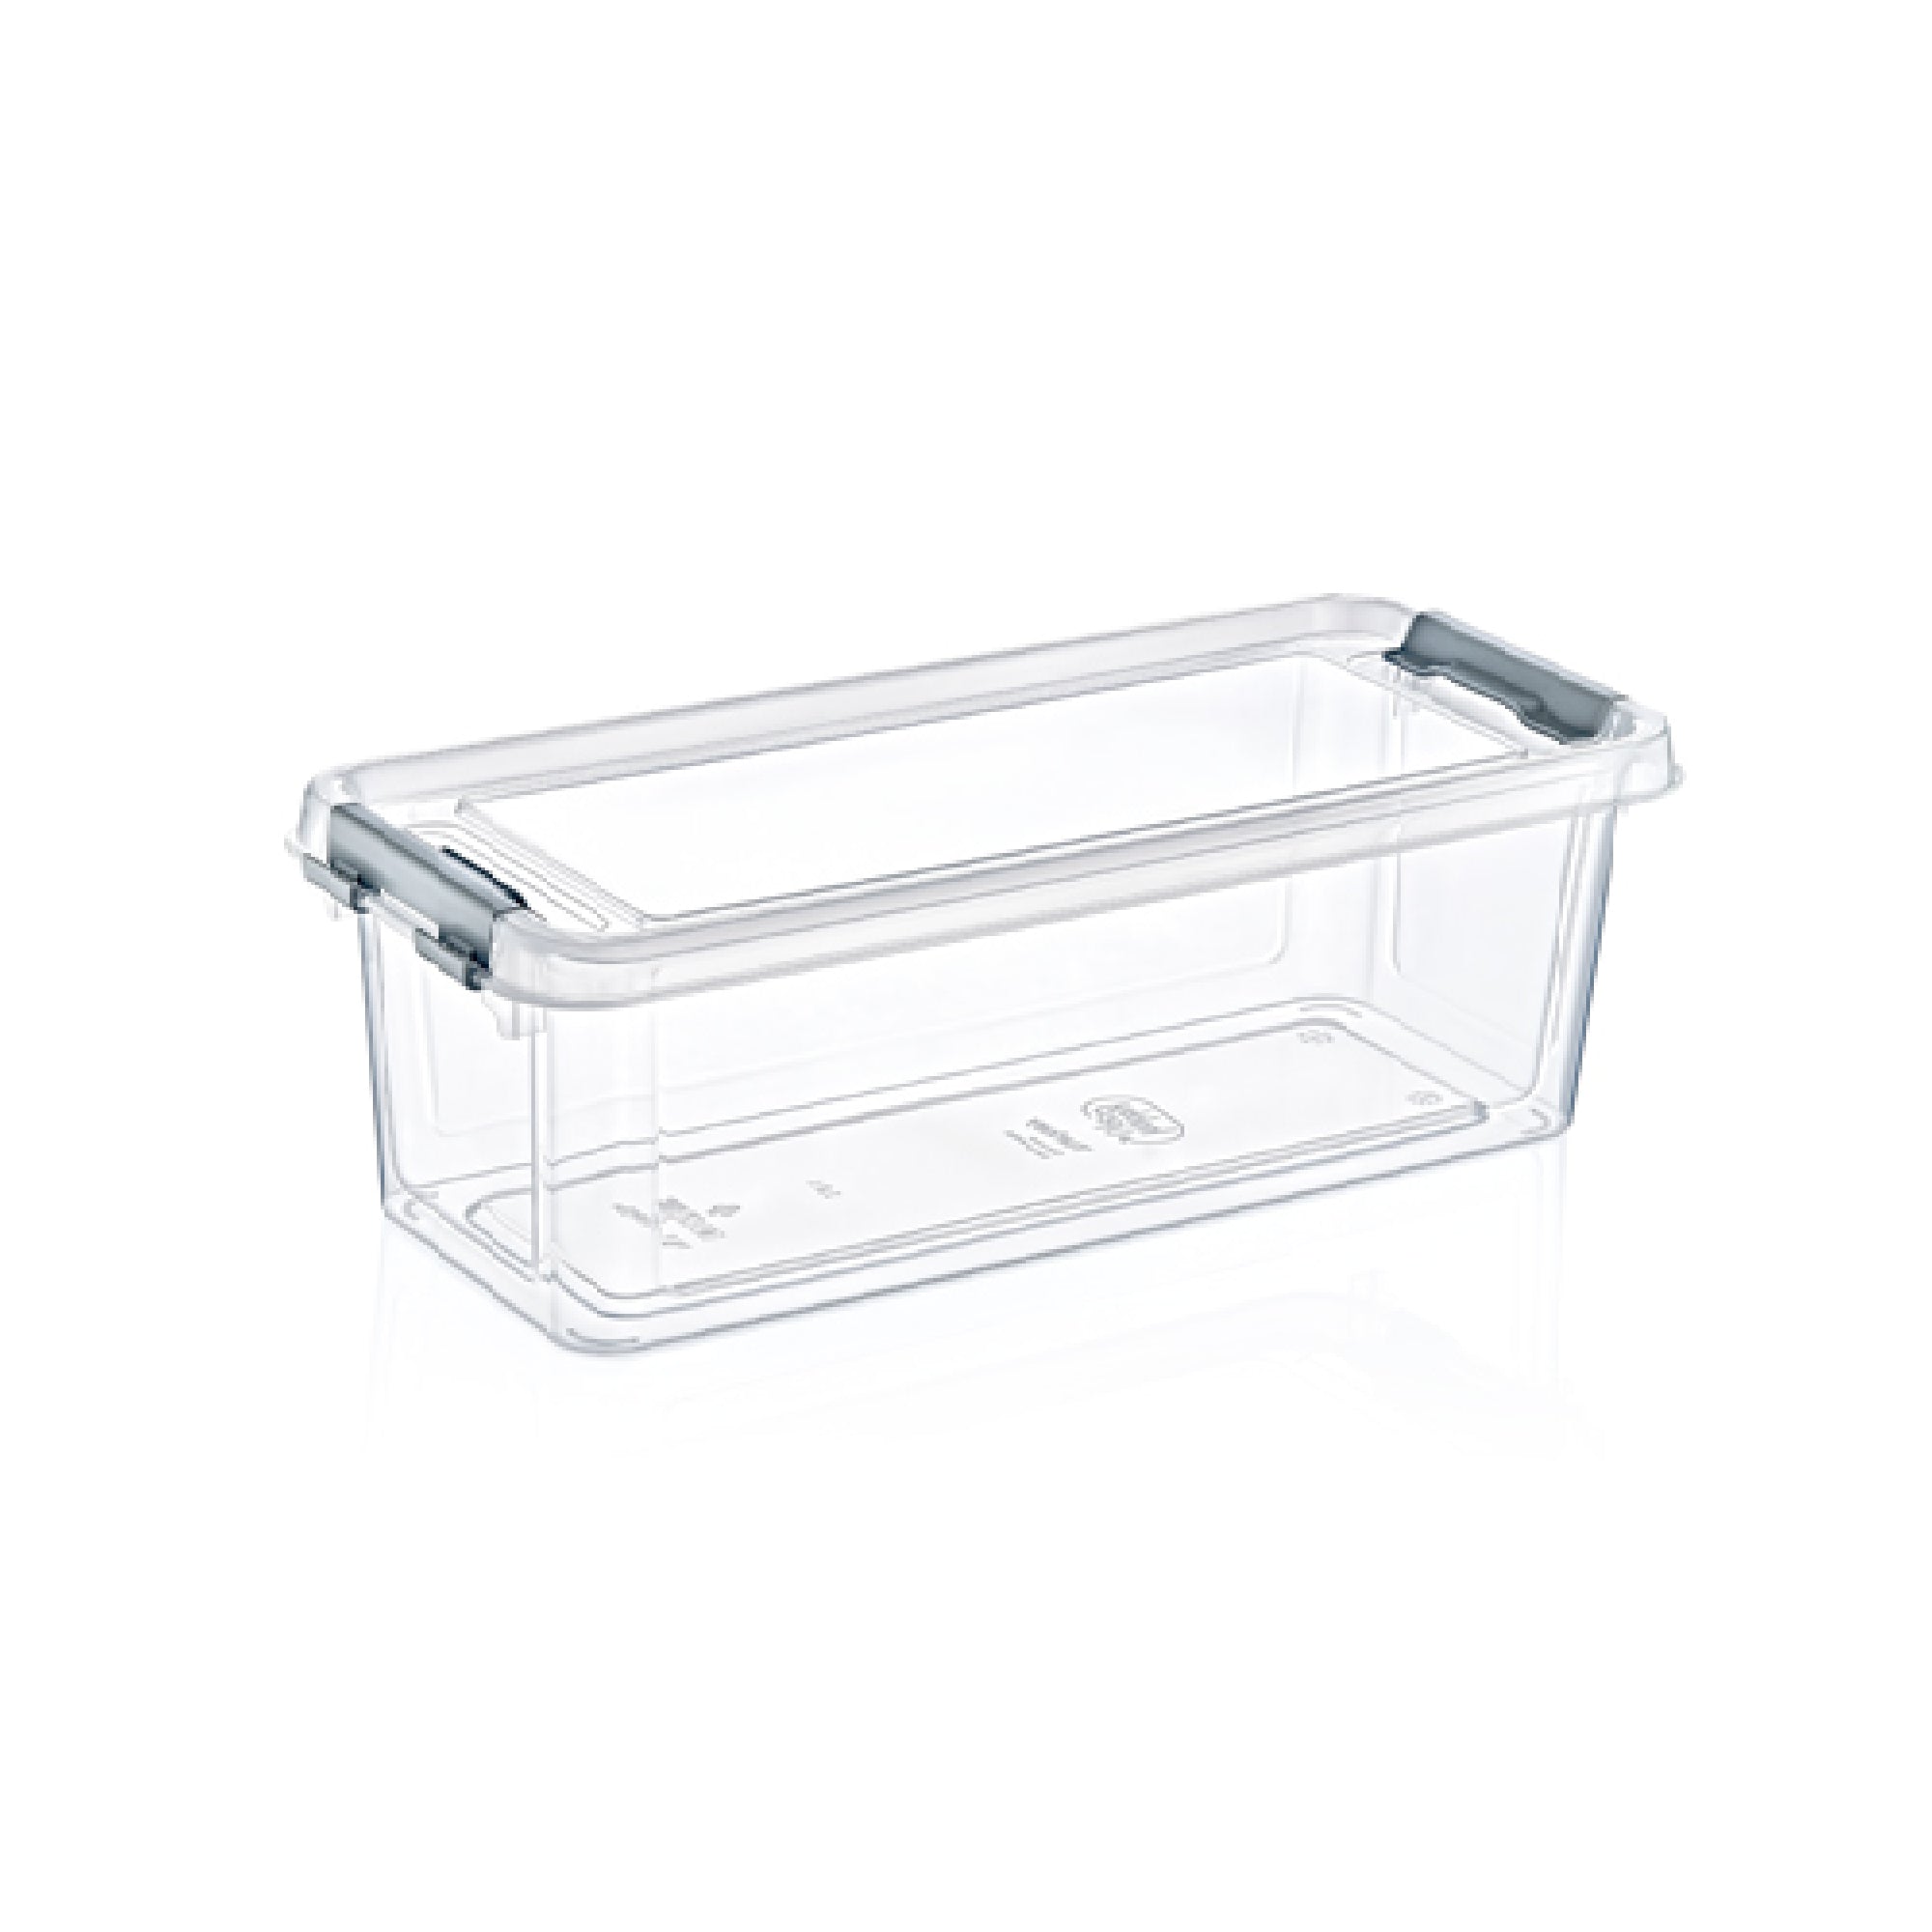 Hobby Life Plastic Grand Long Storage Utility Container Box 1.8L 021060